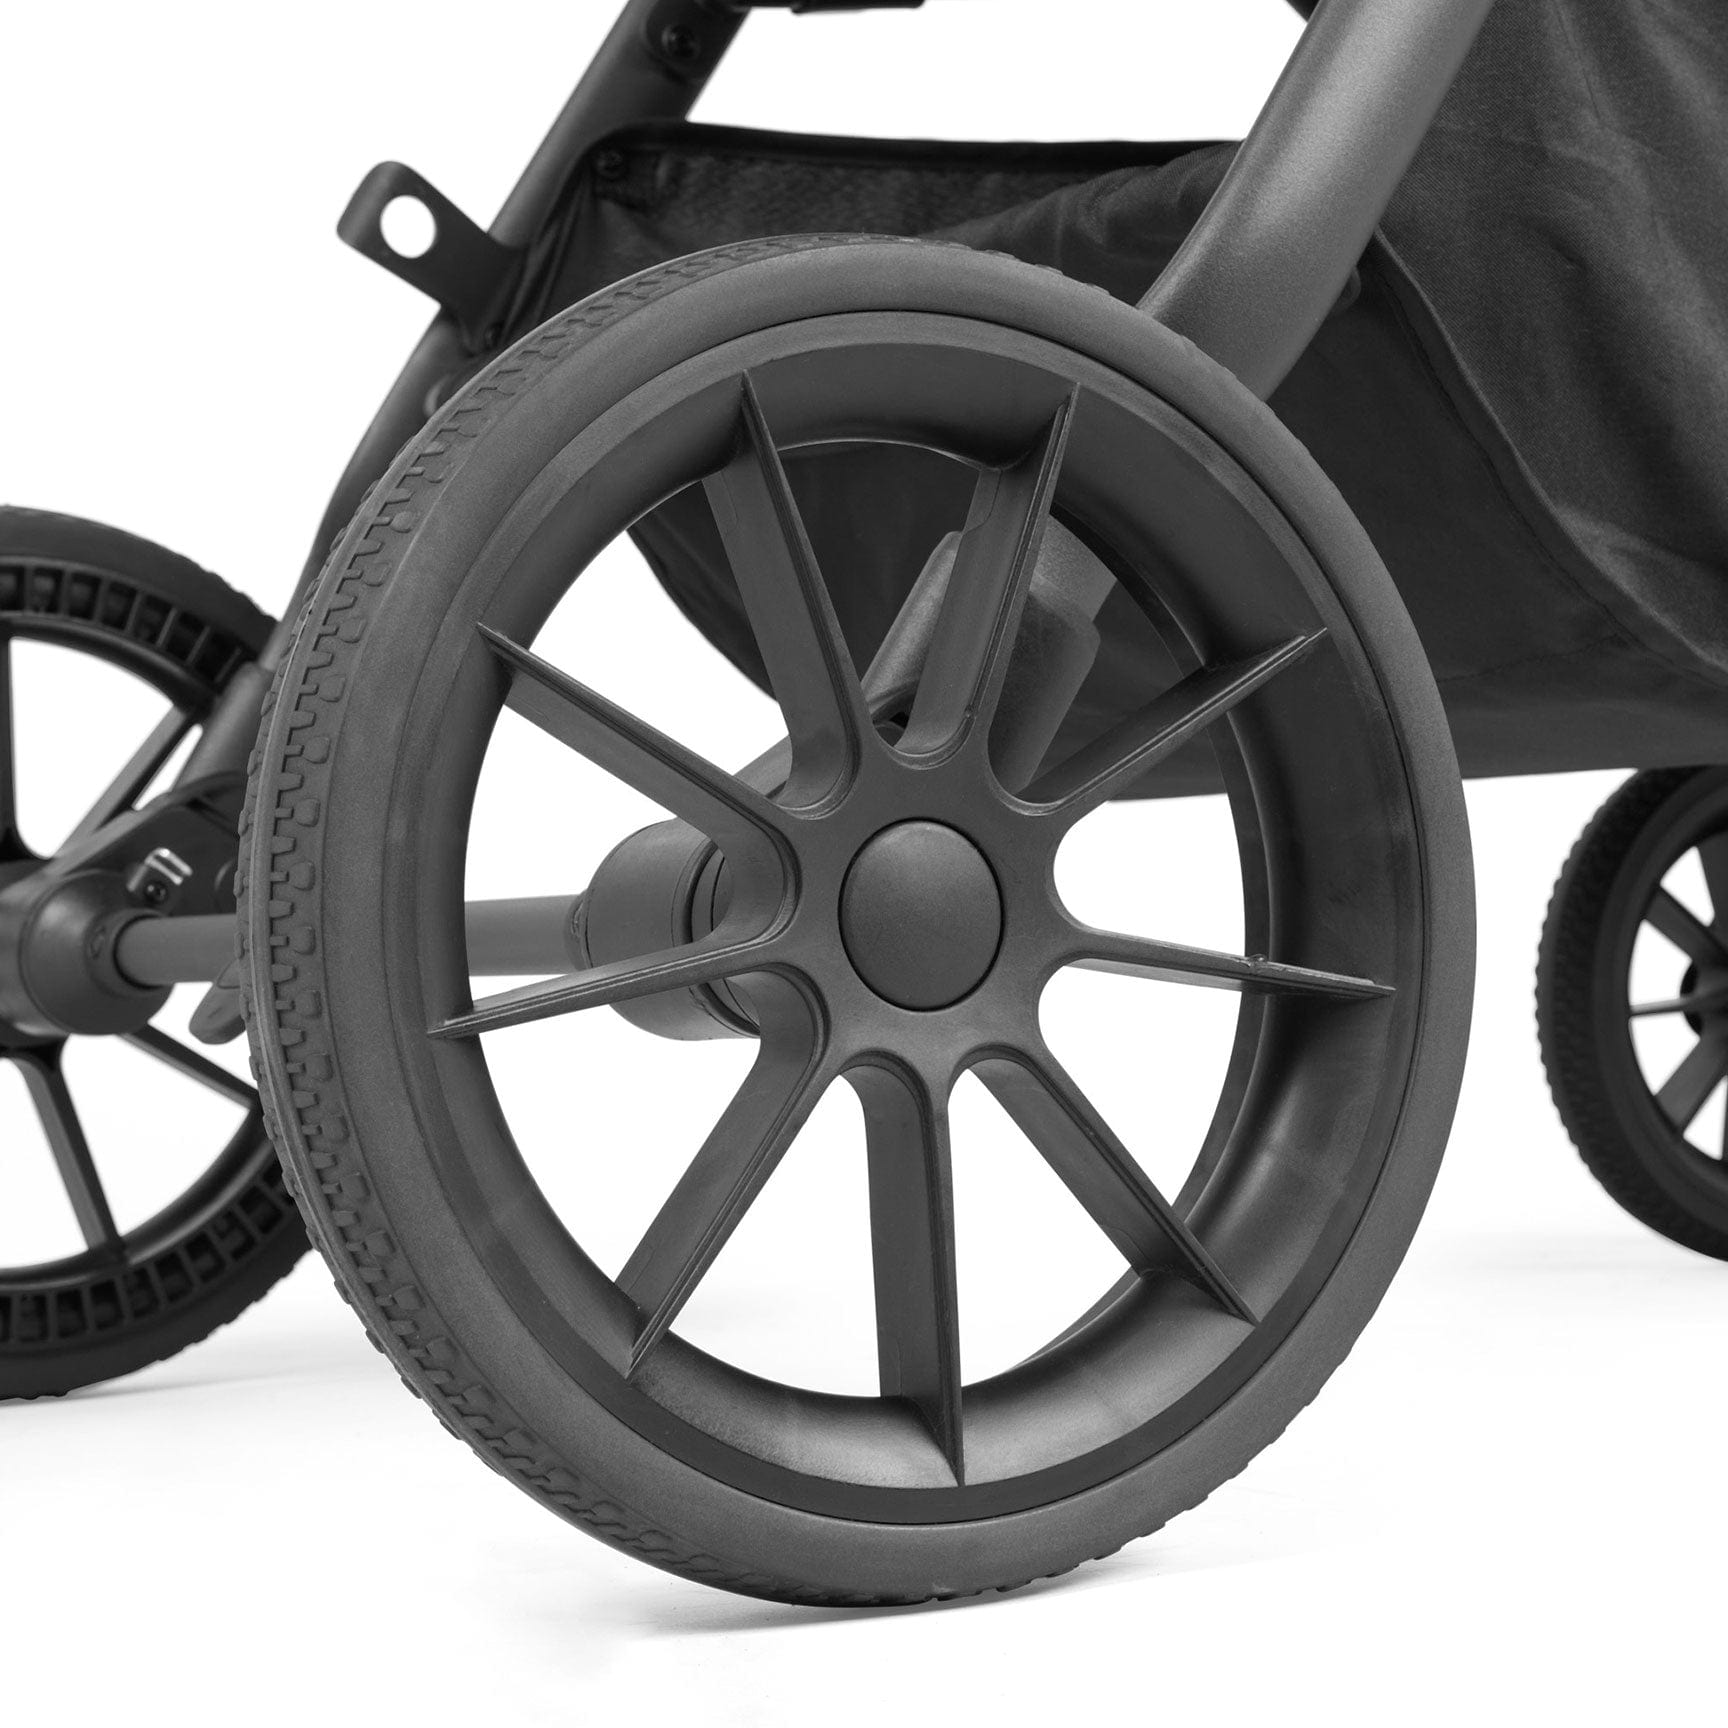 Ickle Bubba Ickle Bubba Cosmo 2 in 1 Plus Carrycot & Pushchair in Gunmetal/Black Travel Systems